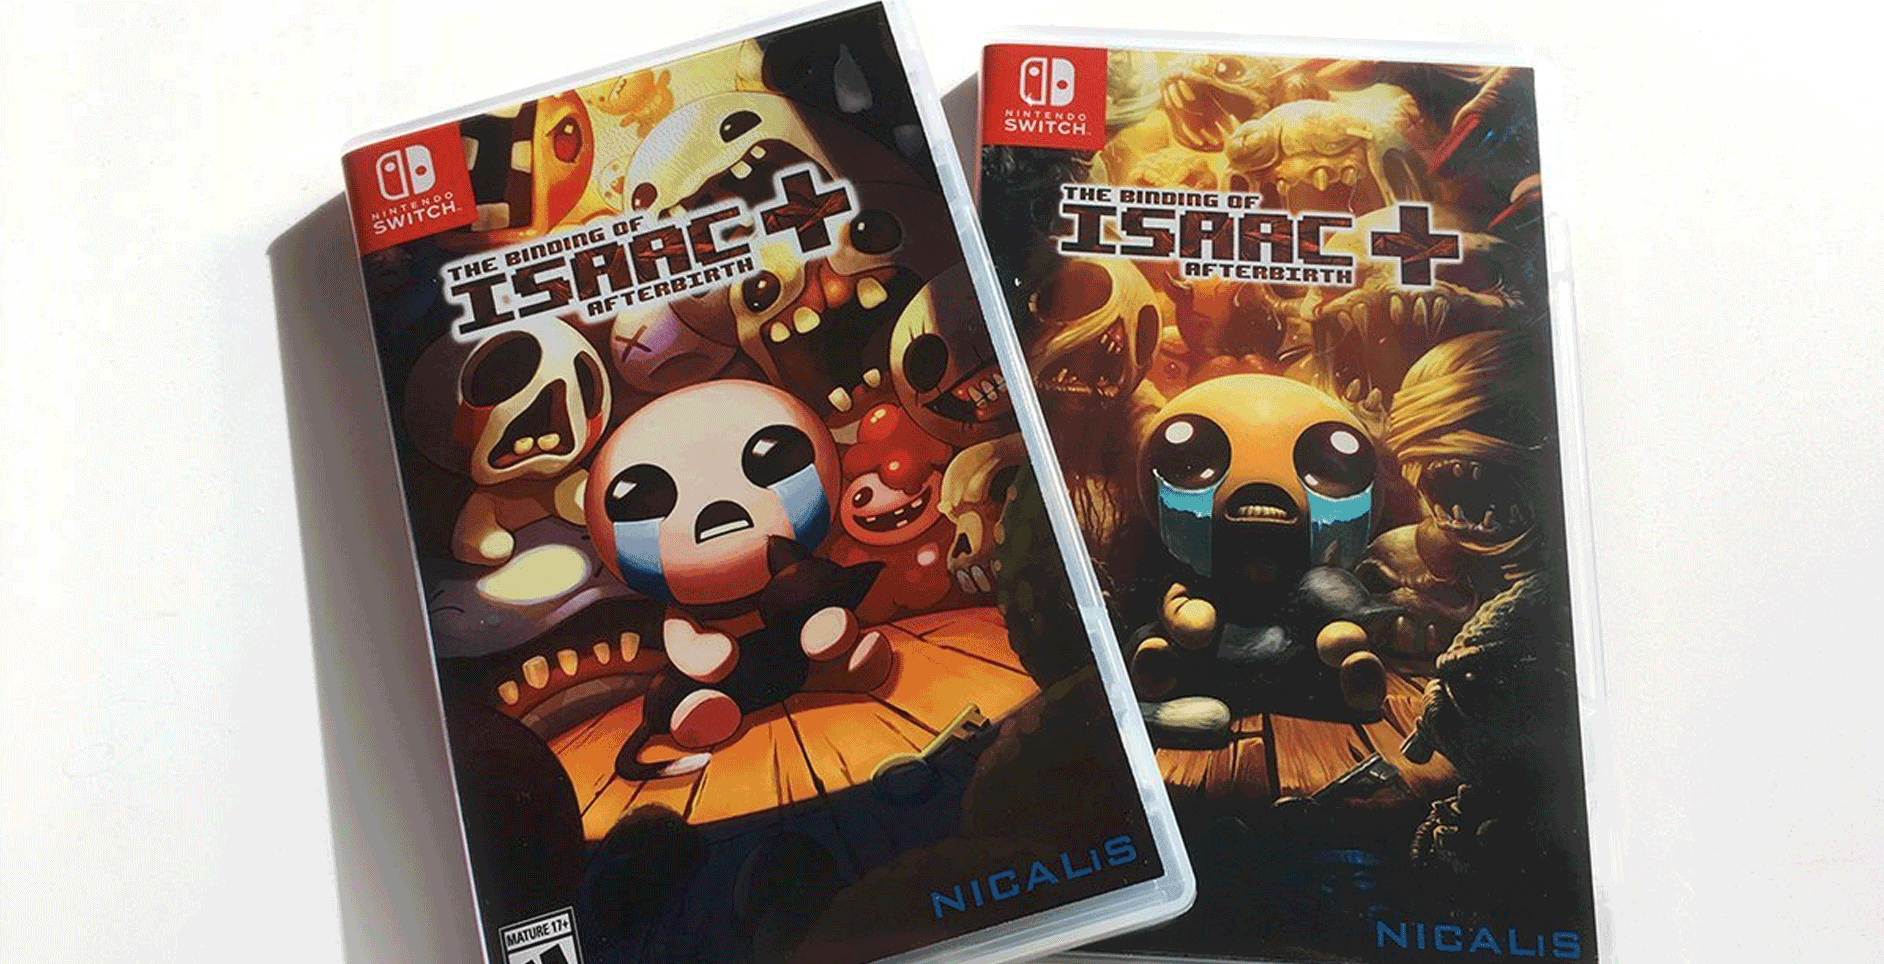 The Binding Of Isaac On Nintendo Switch Is Getting An Australian